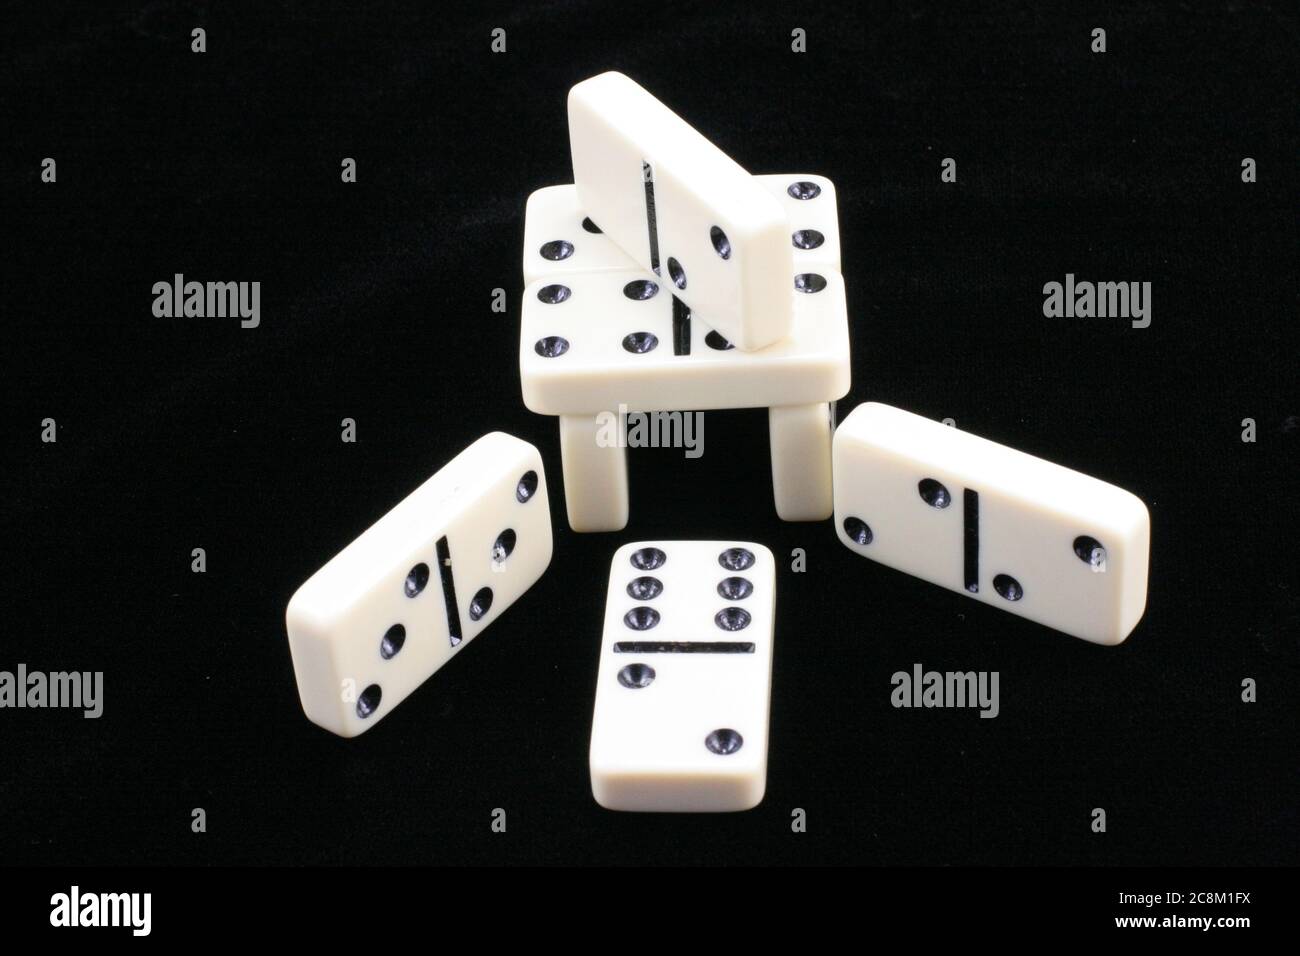 Game of white dominoes on a black background Stock Photo